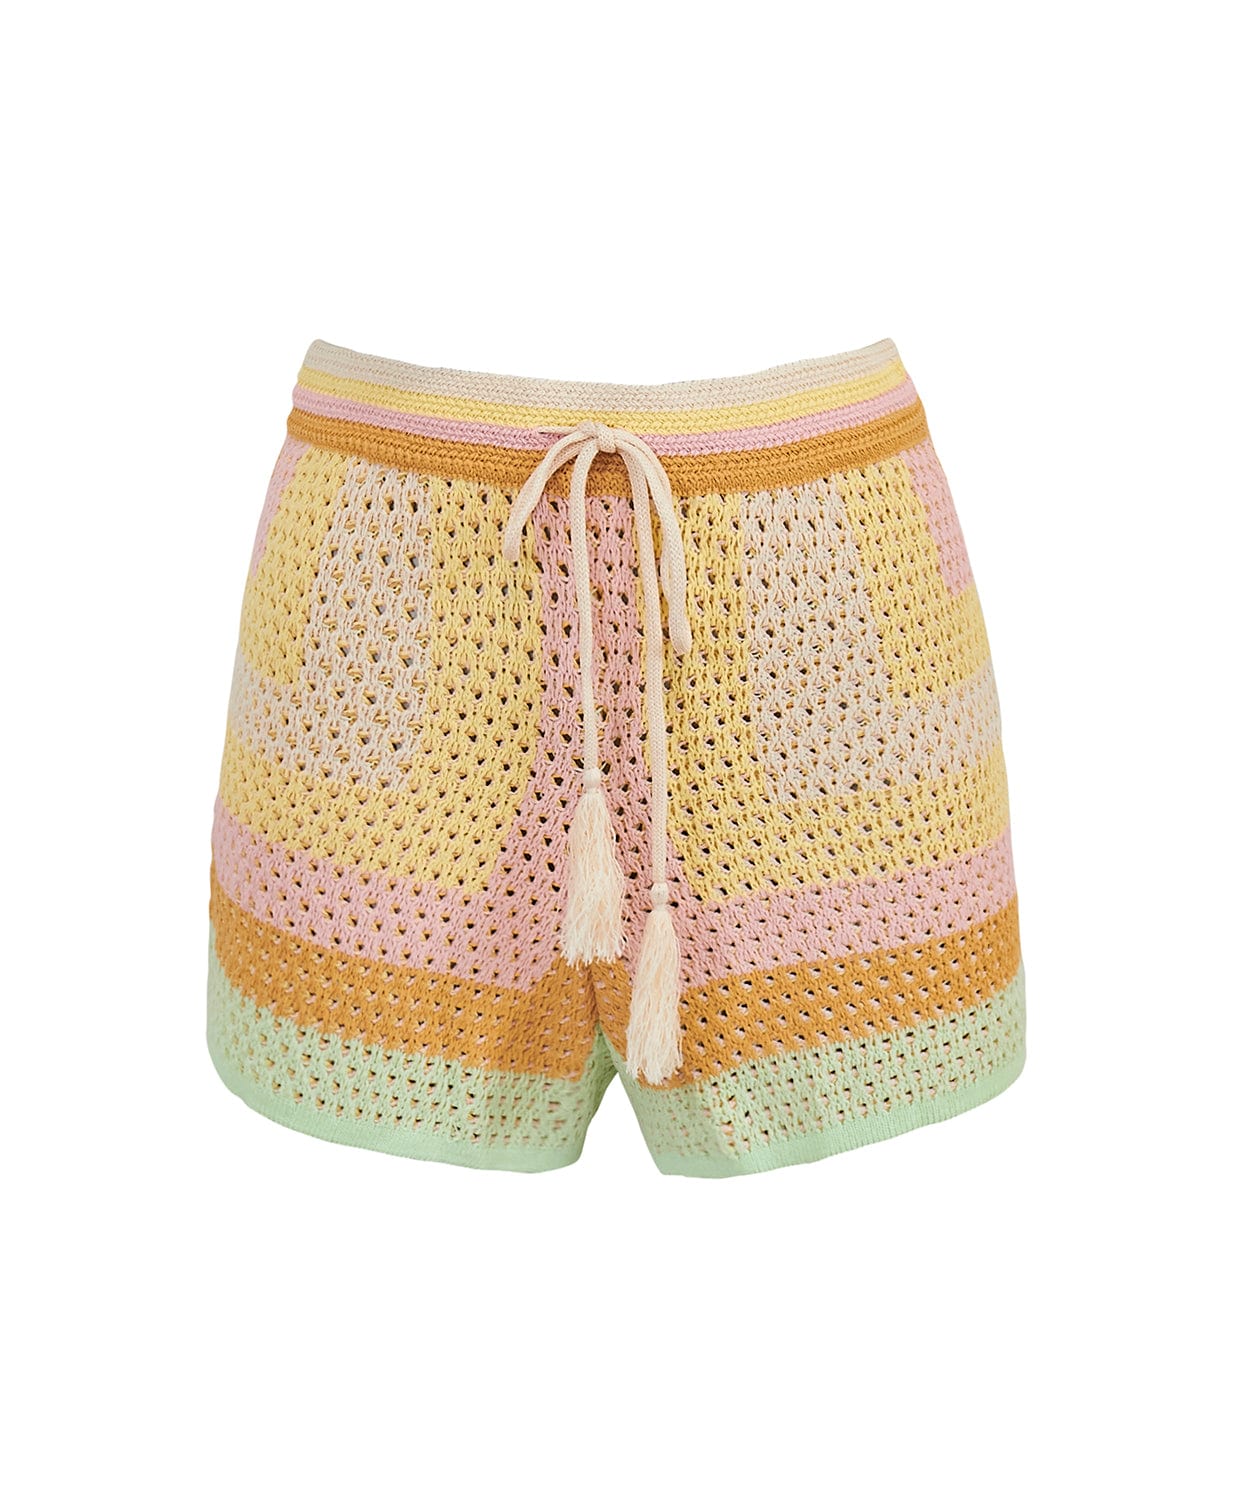 Crochet shorts with a drawstring against a white wall. 